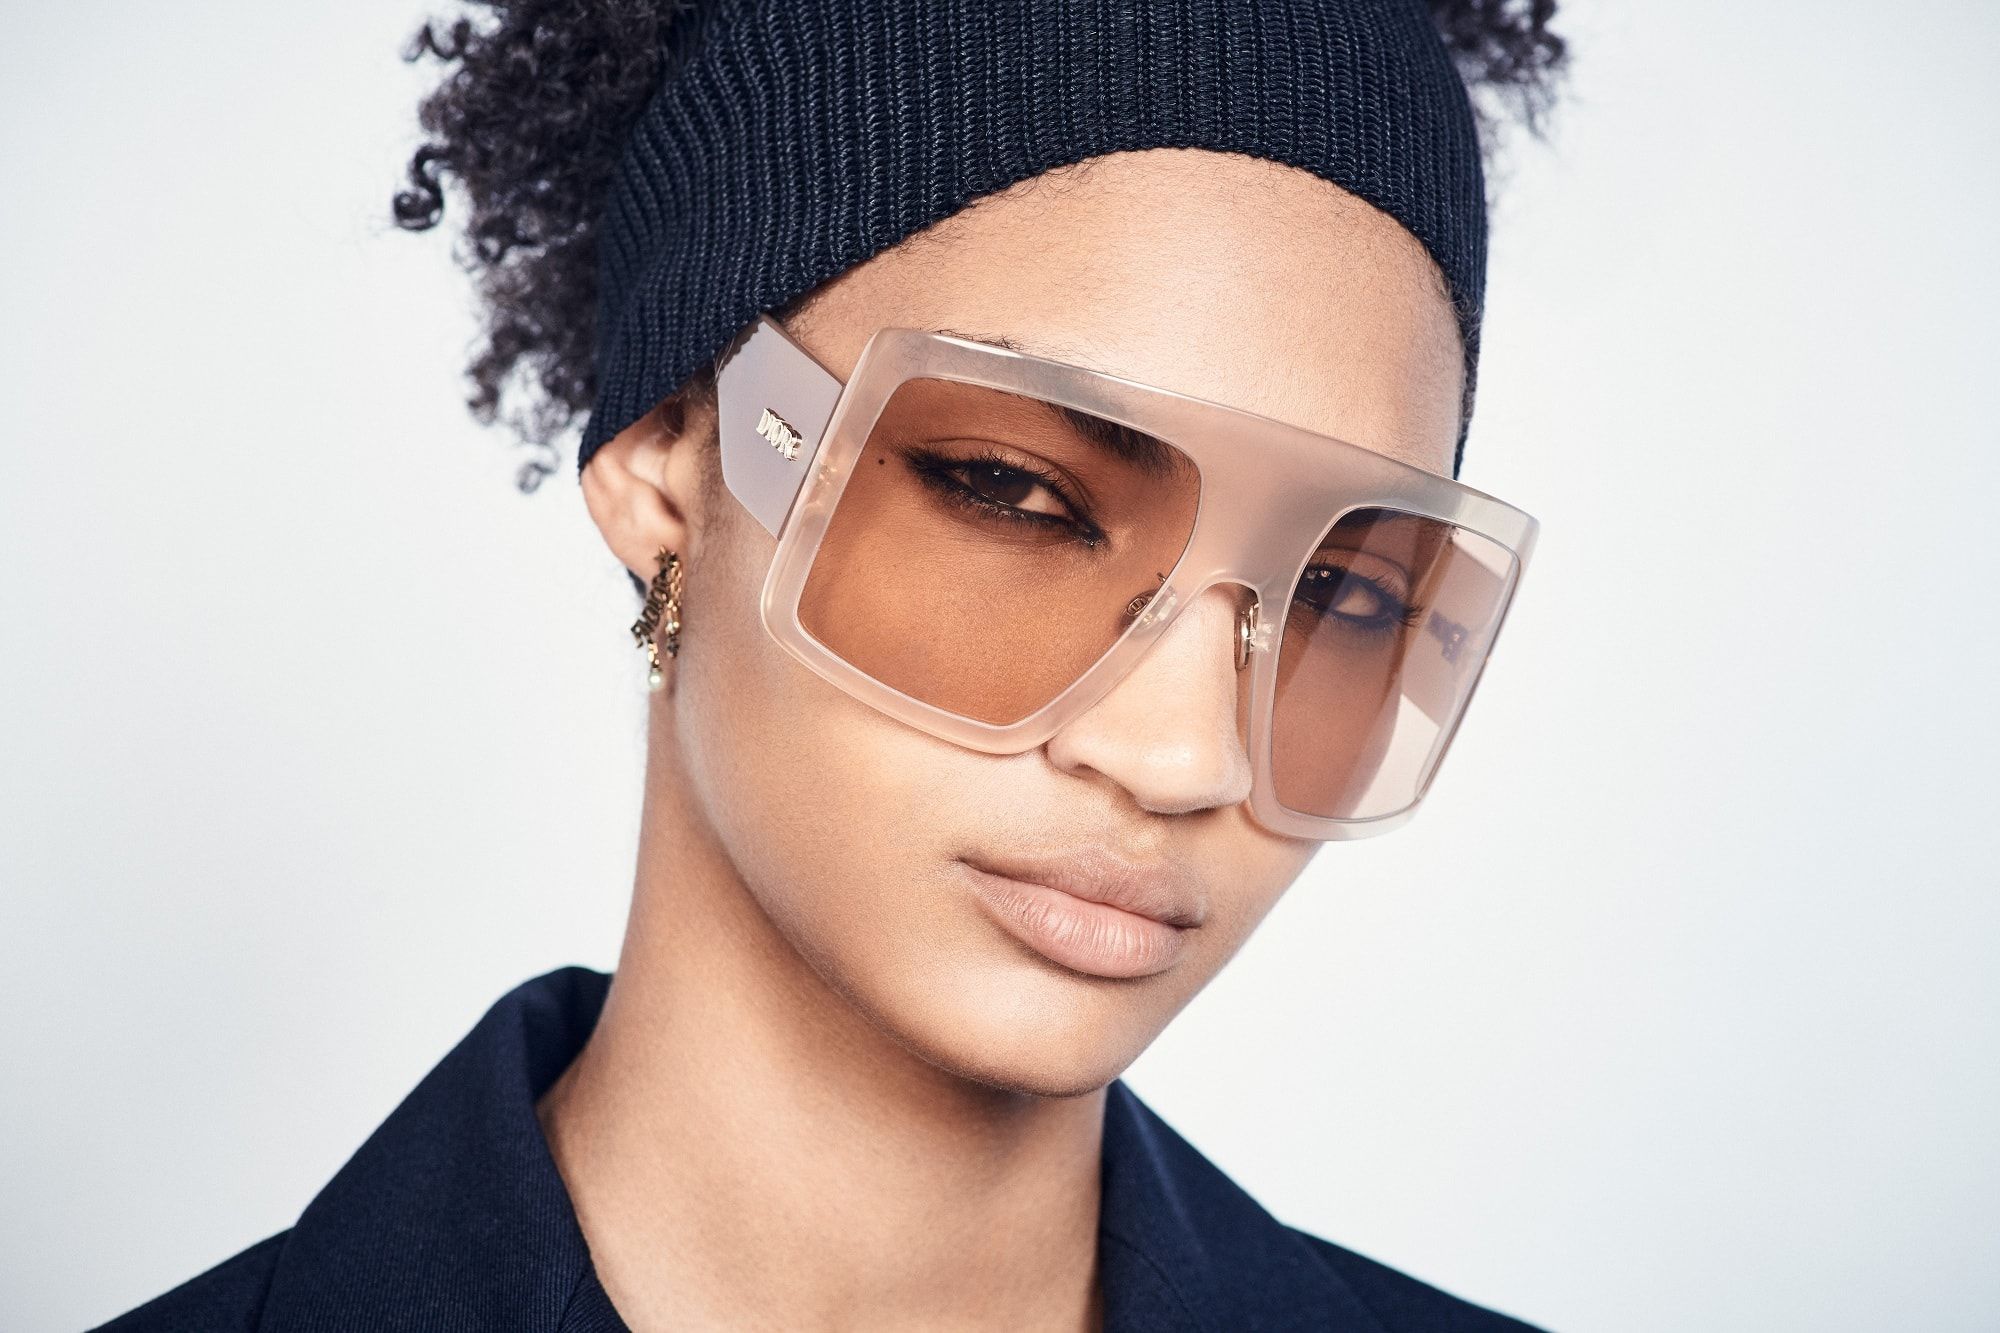 This season’s extravagant sunglasses will keep your style in check